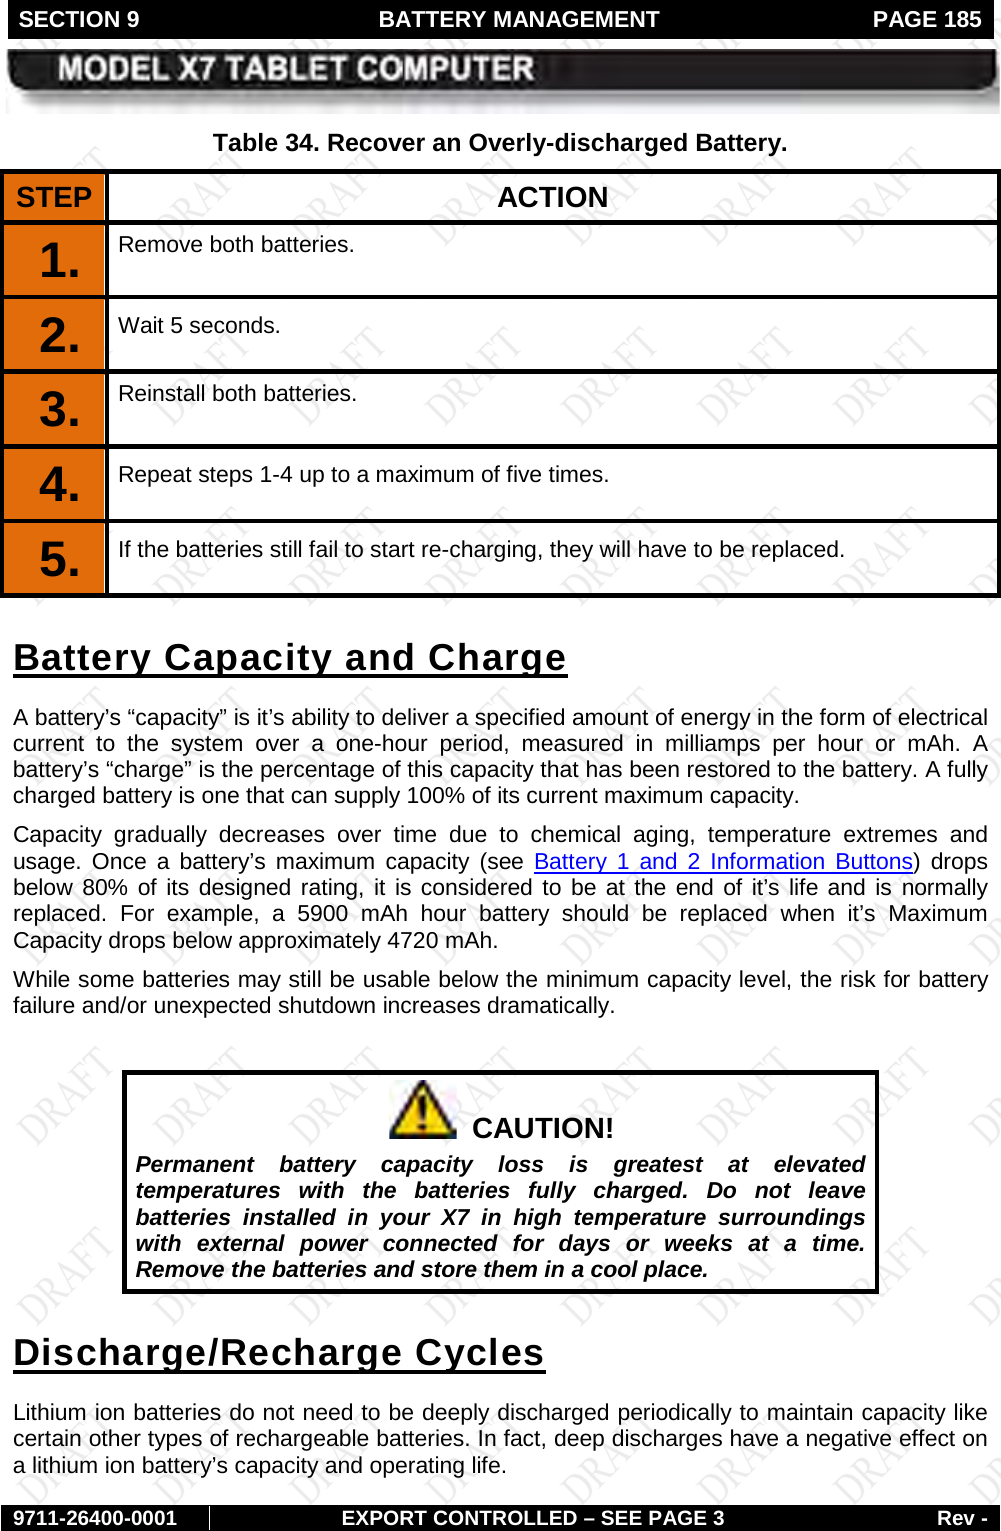 SECTION 9  BATTERY MANAGEMENT  PAGE 185        9711-26400-0001 EXPORT CONTROLLED – SEE PAGE 3 Rev - Table 34. Recover an Overly-discharged Battery. STEP  ACTION 1.  Remove both batteries. 2.  Wait 5 seconds. 3.  Reinstall both batteries. 4.  Repeat steps 1-4 up to a maximum of five times. 5.  If the batteries still fail to start re-charging, they will have to be replaced. A battery’s “capacity” is it’s ability to deliver a specified amount of energy in the form of electrical current to the system over a one-hour period,  measured in milliamps per hour or mAh. A battery’s “charge” is the percentage of this capacity that has been restored to the battery. A fully charged battery is one that can supply 100% of its current maximum capacity. Battery Capacity and Charge Capacity gradually decreases over time due to chemical aging, temperature extremes and usage. Once a battery’s maximum  capacity (see  Battery 1 and 2 Information Buttons) drops below 80% of its designed rating, it is considered to be at the end of it’s life and is normally replaced.  For example, a 5900 mAh hour battery should be replaced when it’s Maximum Capacity drops below approximately 4720 mAh.  While some batteries may still be usable below the minimum capacity level, the risk for battery failure and/or unexpected shutdown increases dramatically.       CAUTION! Permanent battery capacity loss is greatest at elevated temperatures with the batteries fully charged. Do not leave batteries installed in your X7 in high temperature surroundings with external power connected for days or weeks at a time. Remove the batteries and store them in a cool place. Lithium ion batteries do not need to be deeply discharged periodically to maintain capacity like certain other types of rechargeable batteries. In fact, deep discharges have a negative effect on a lithium ion battery’s capacity and operating life.  Discharge/Recharge Cycles 